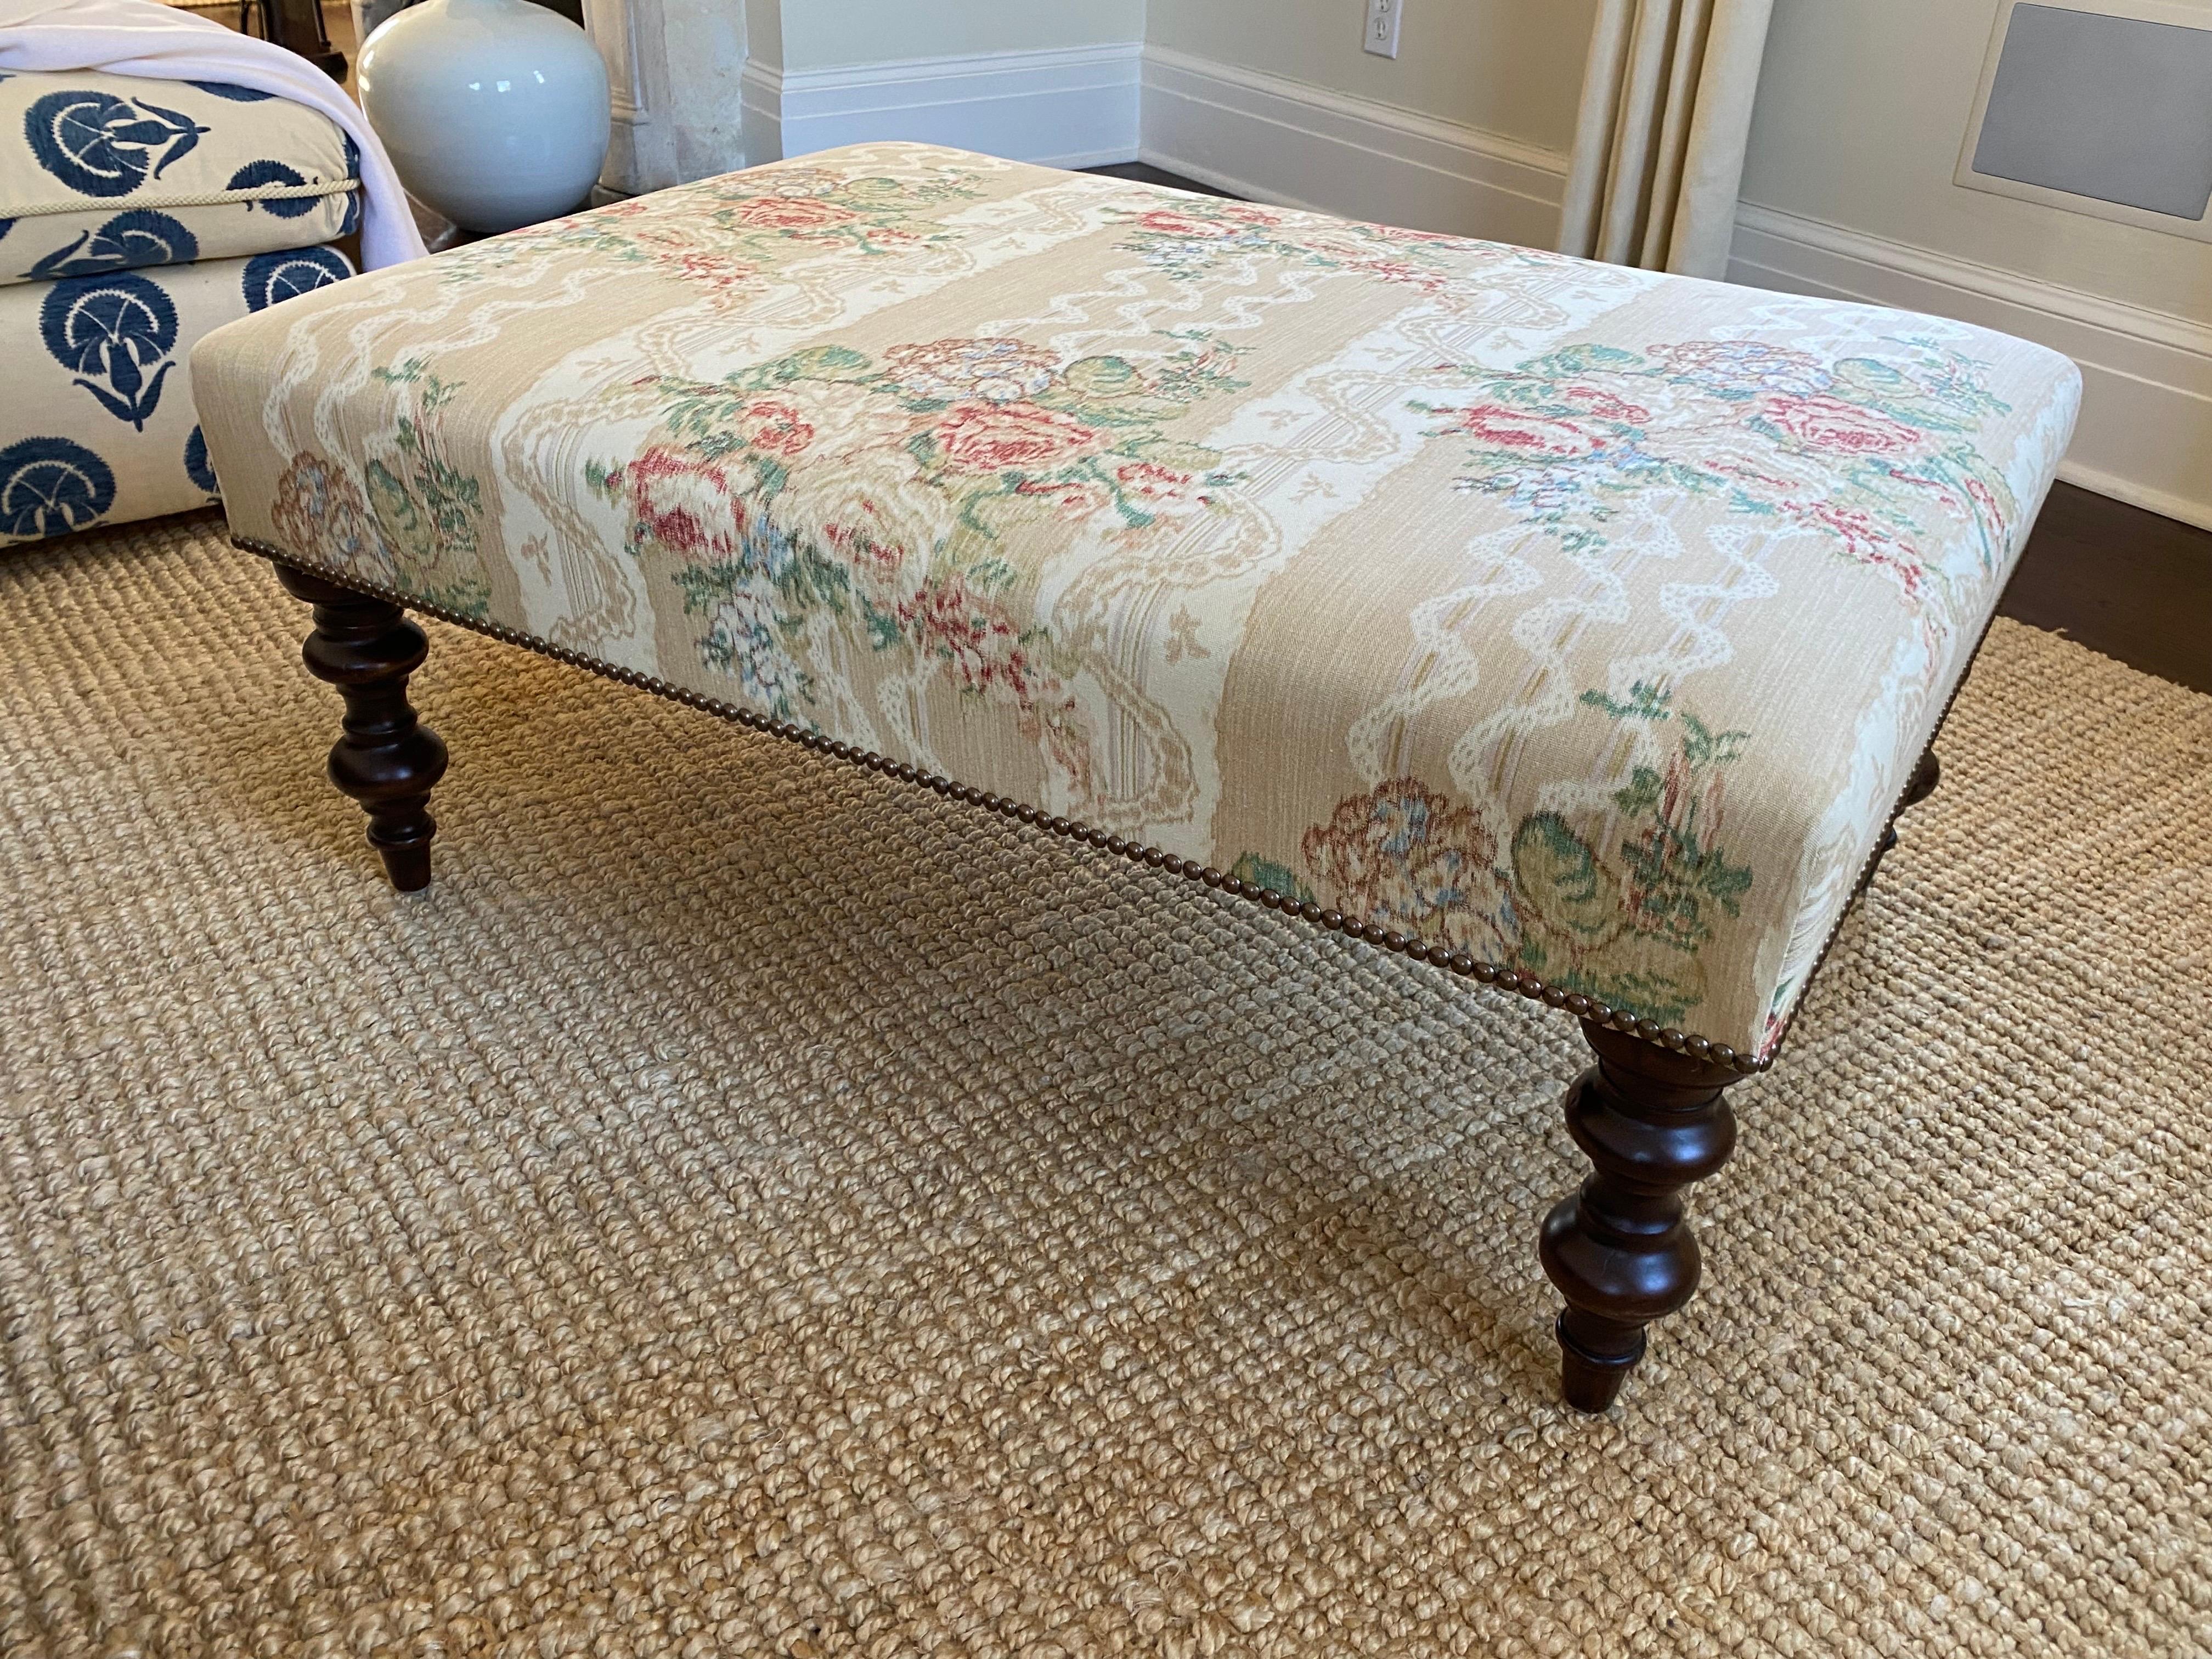 Vintage Upholstered Ottoman in Floral Chintz Stripe with Additional White Slipcover
An attractive ottoman covered in a classic floral ribbon stripe with nailheads on turned wood legs. A cotton linen white slipcover also comes with this ottoman.